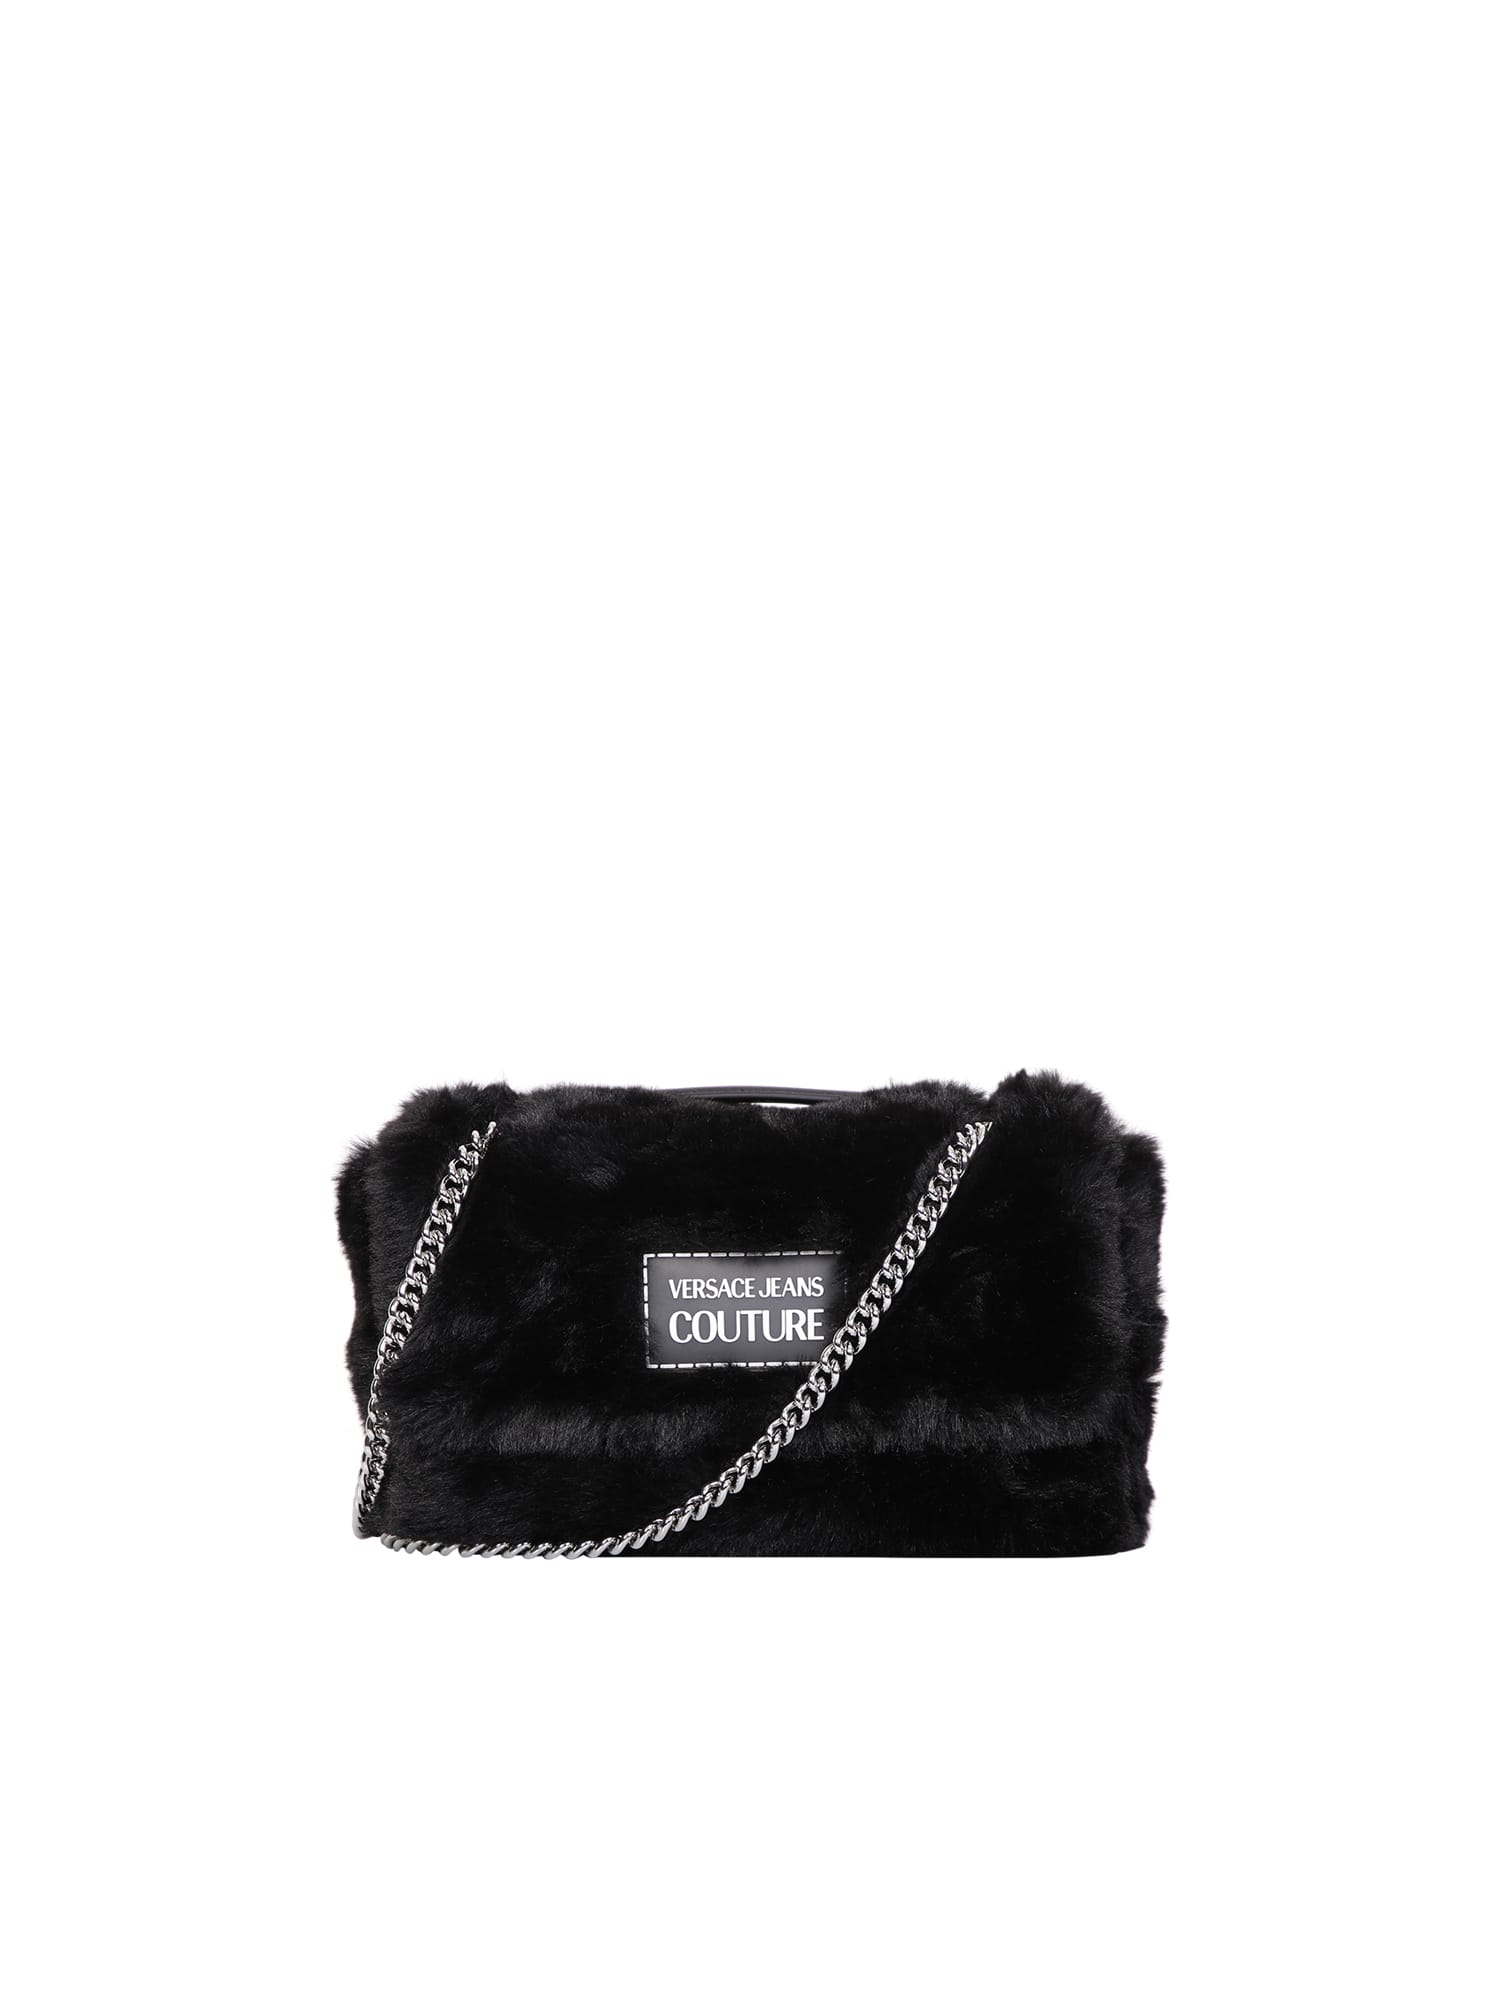 Versace Jeans Couture Fluffy Bag Black